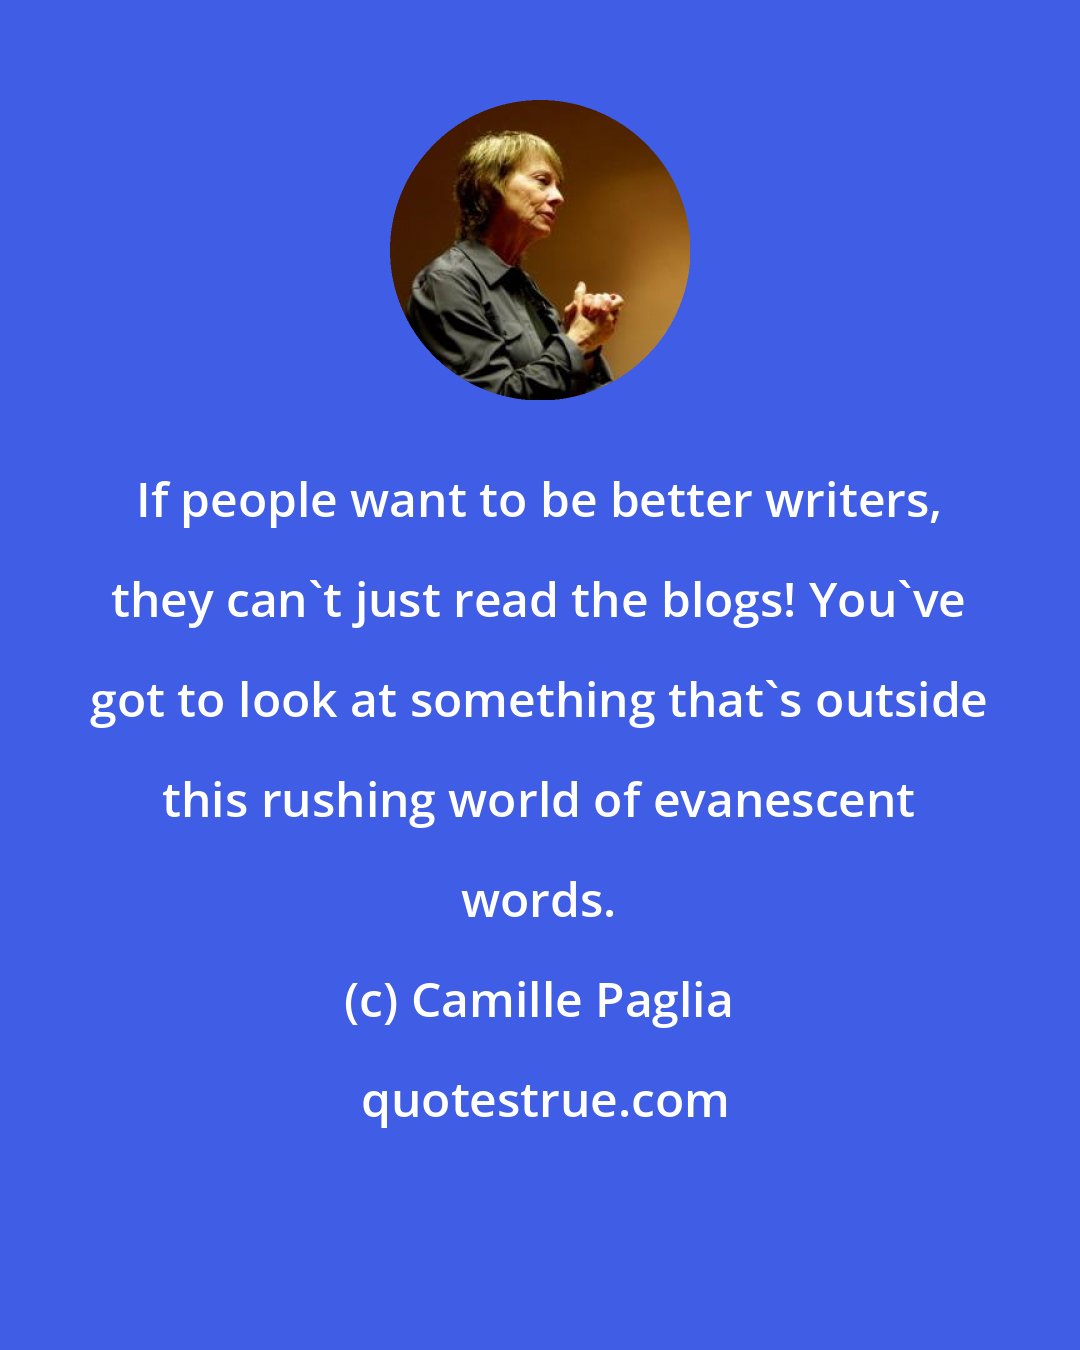 Camille Paglia: If people want to be better writers, they can't just read the blogs! You've got to look at something that's outside this rushing world of evanescent words.